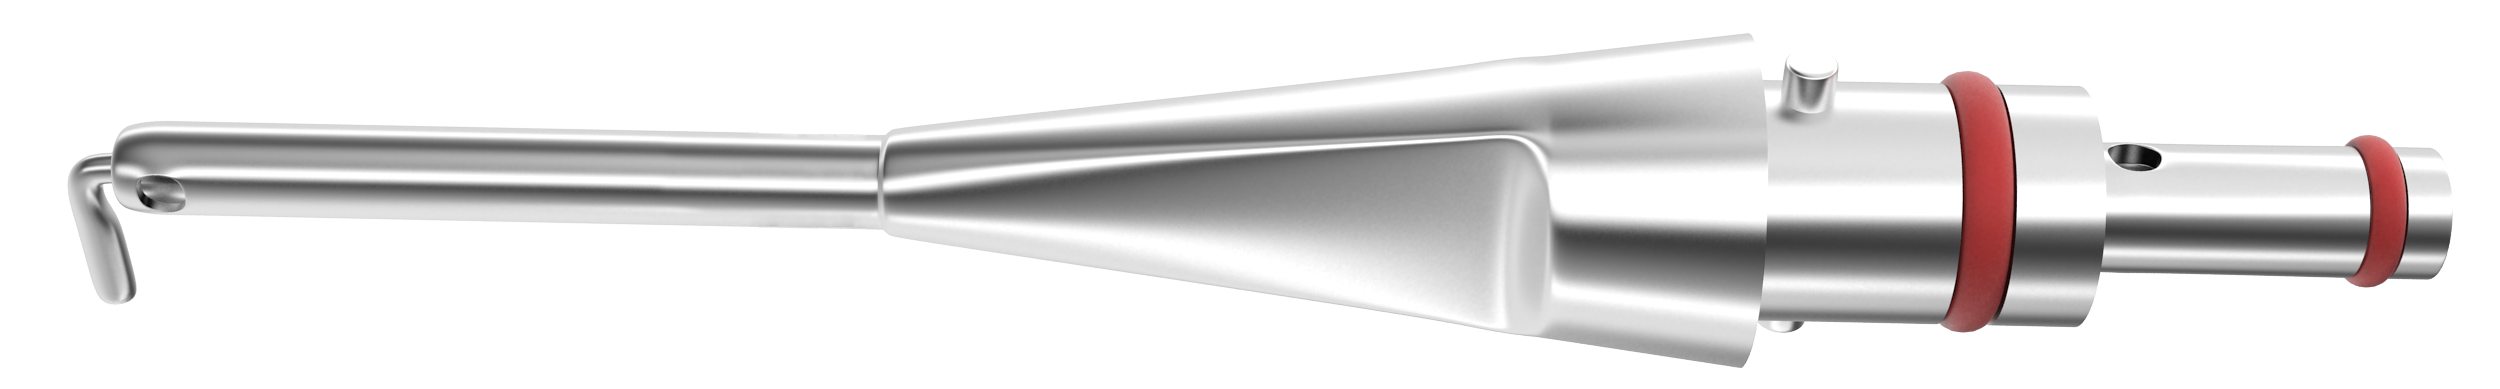 337R 7-080/90 I/A Tip, Angled 90°, Stainless Steel